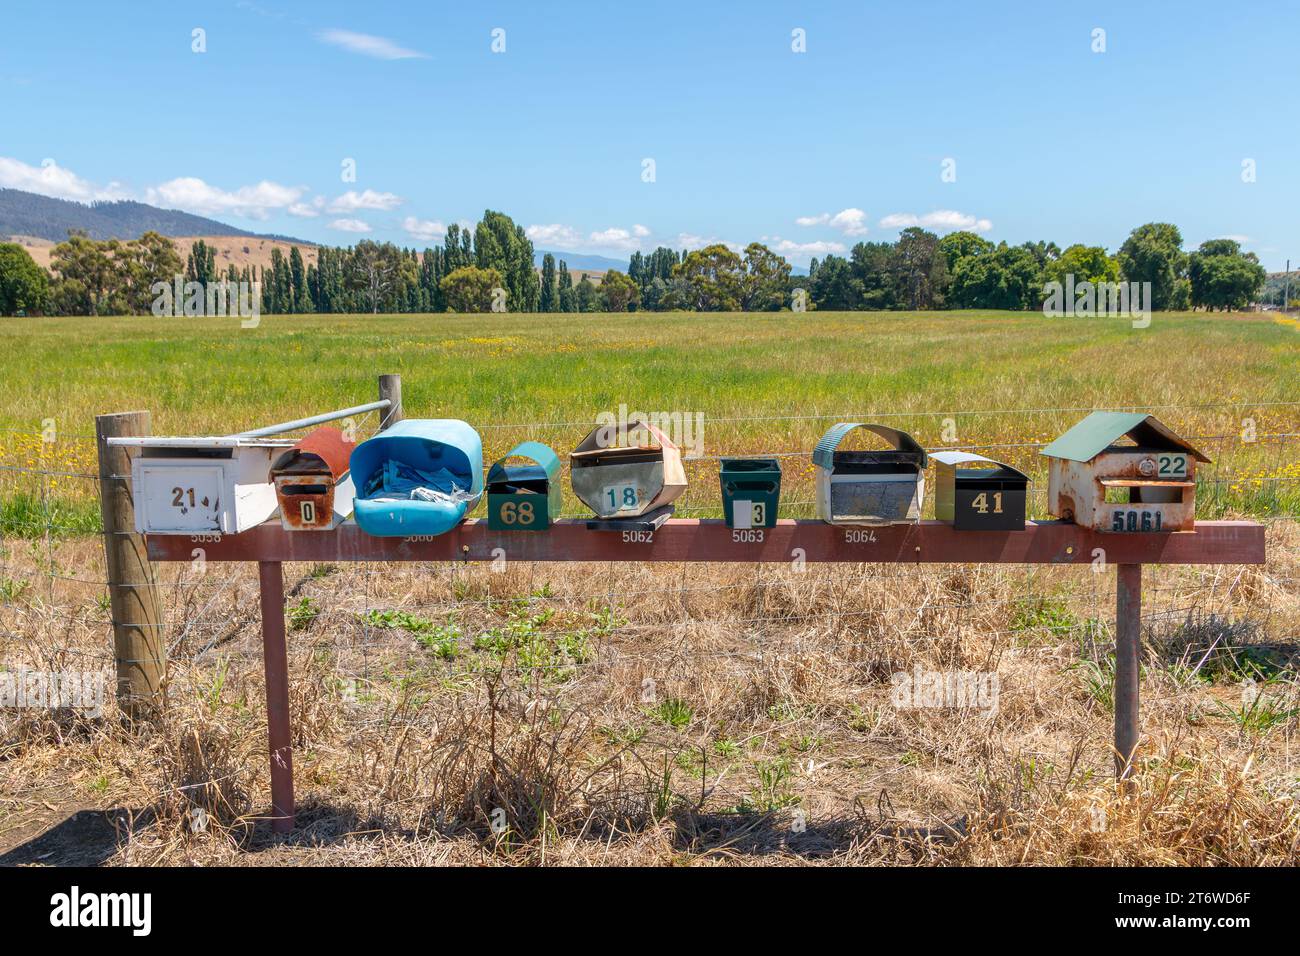 Tasmania, Australia - 26 December 2022: row of countryside letterboxes with green field, trees and blue sky background Stock Photo